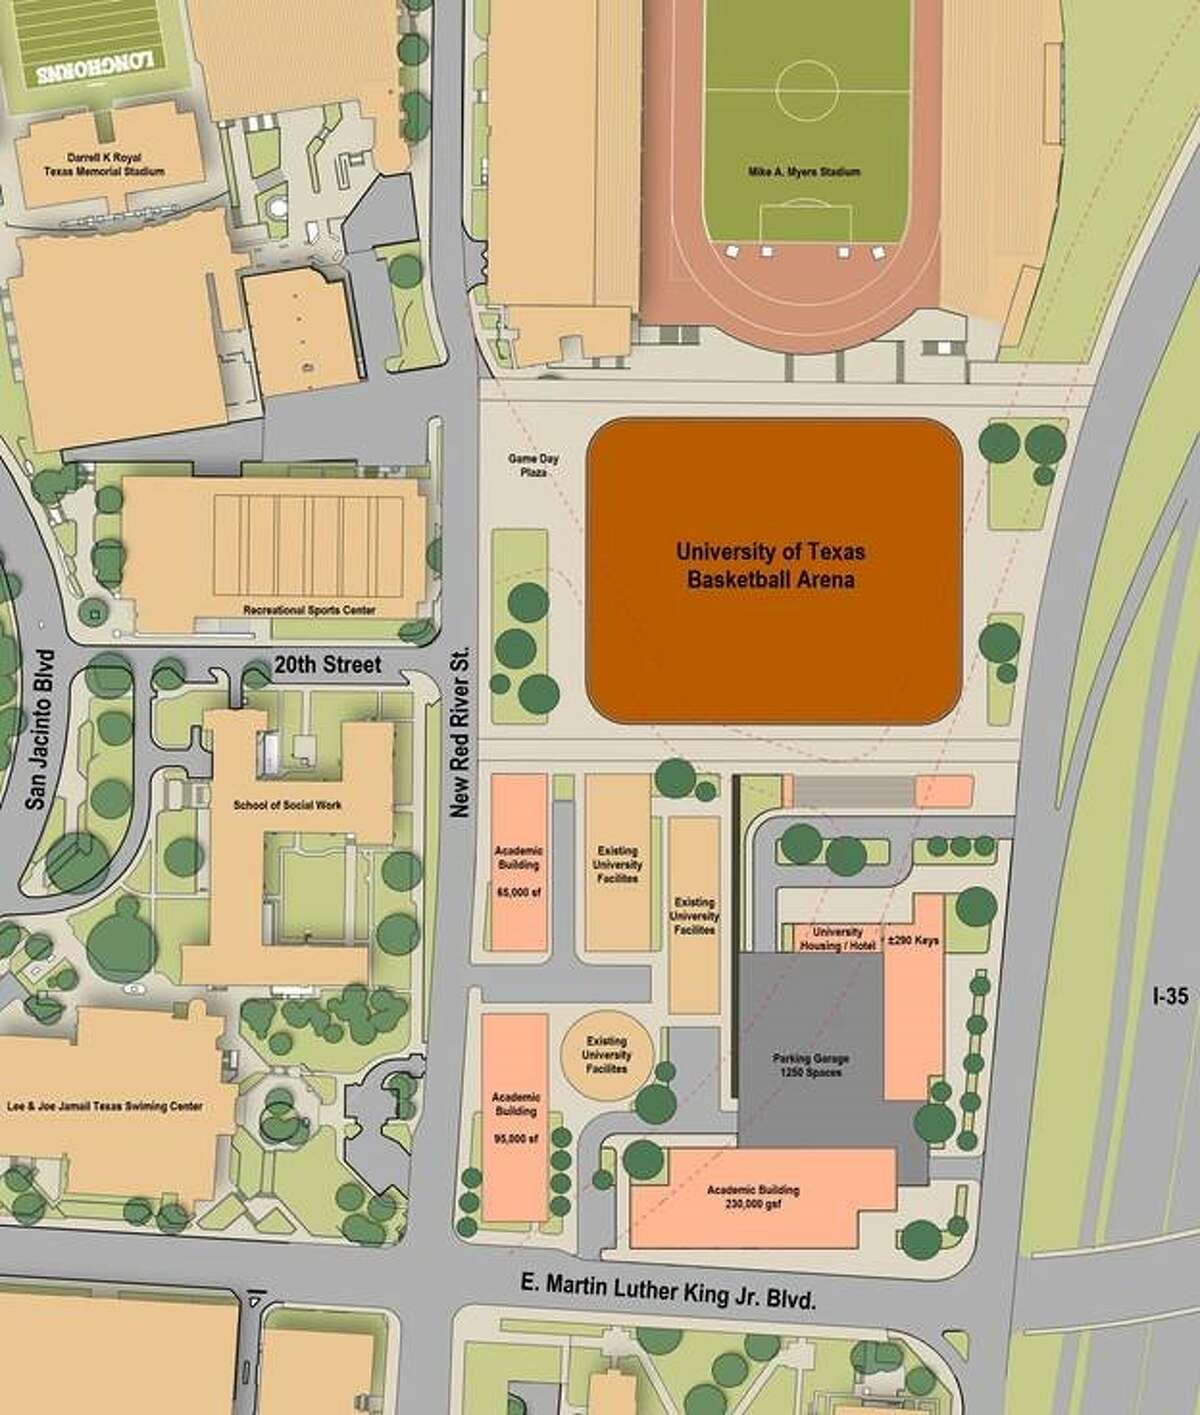 Proposed site for Texas' new basketball arena, which well replace the Frank Erwin Center.